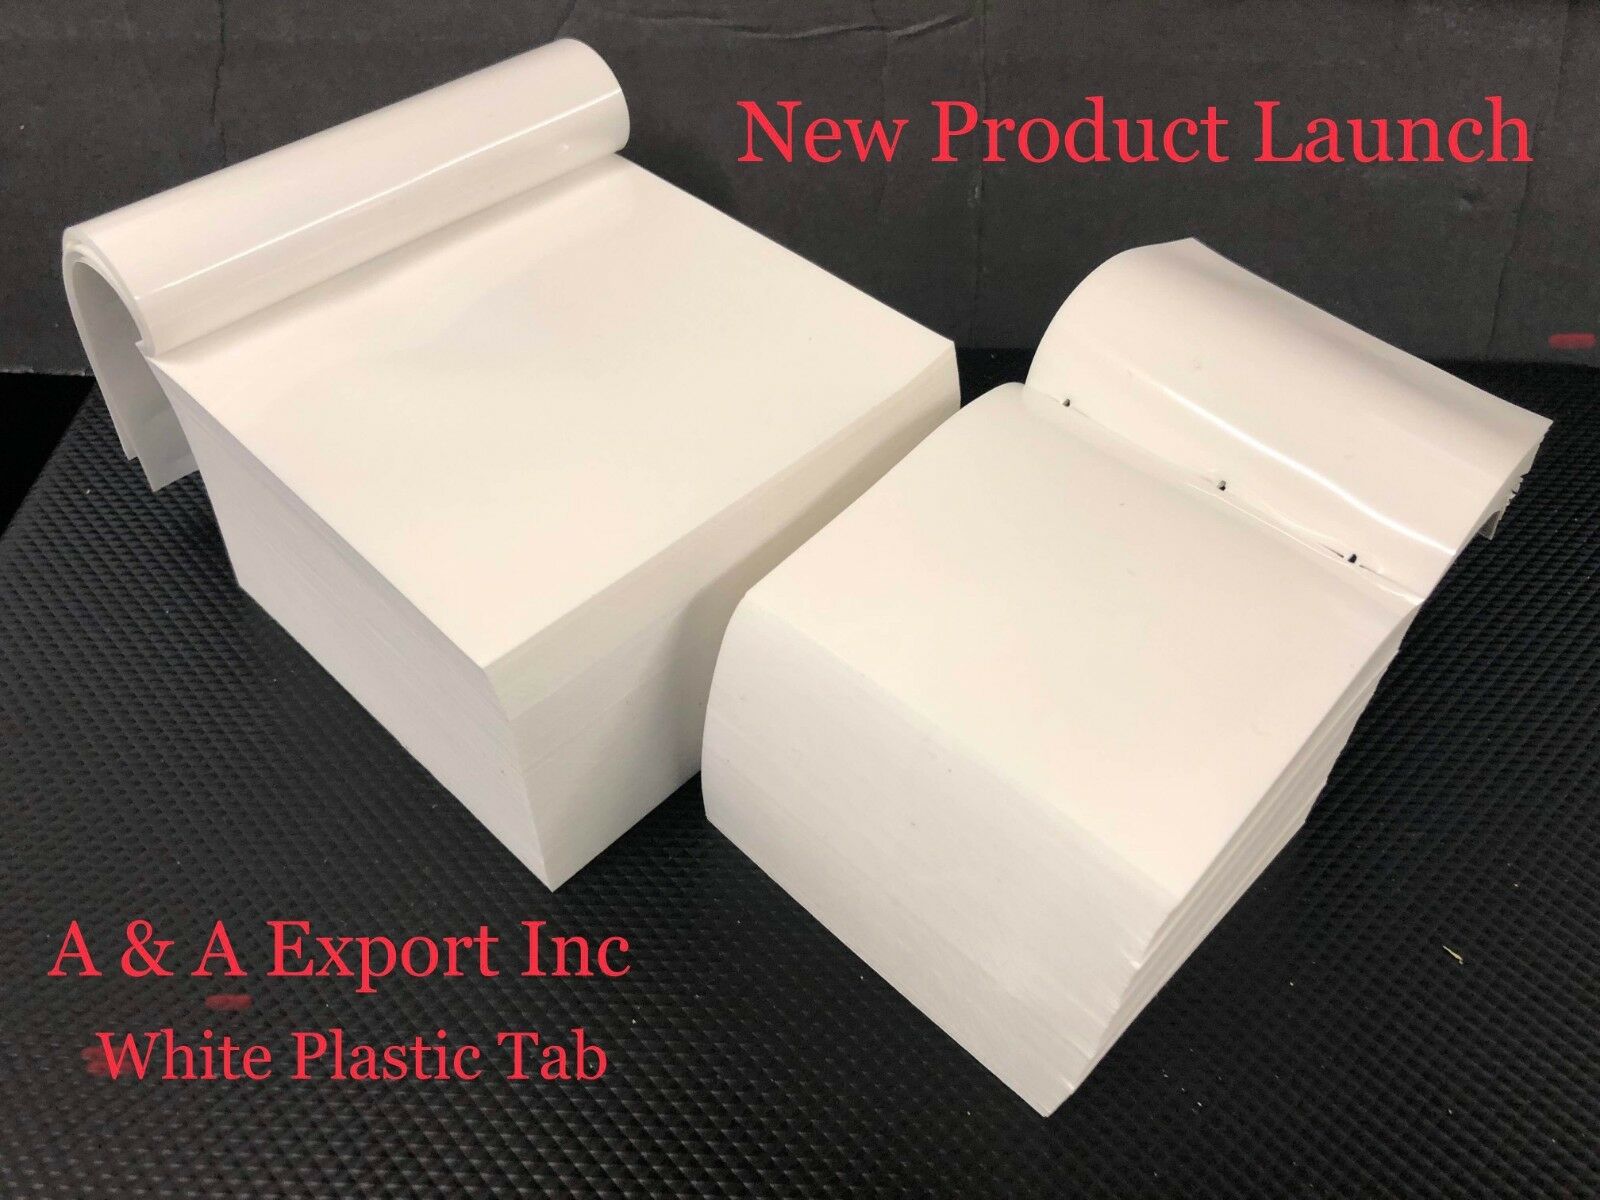 Free Shipping - On Sale Now- 3x3 White Plastic Tabs 5,000 cts - A&A Export Inc